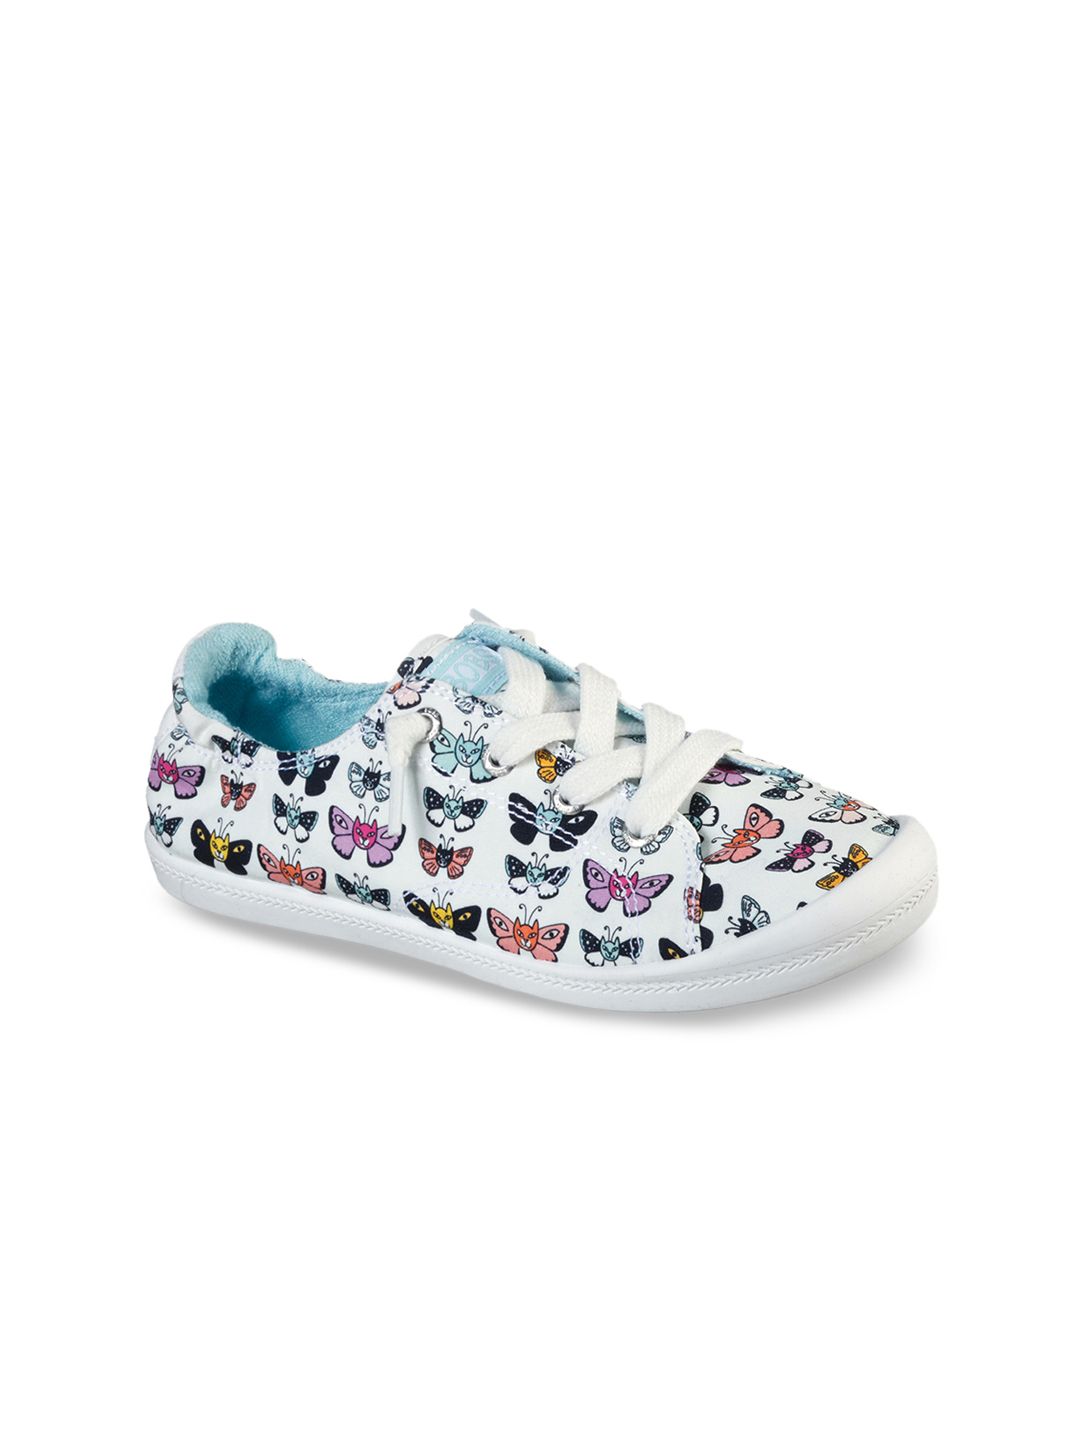 Skechers Women White Printed Leather Slip-On Sneakers Price in India